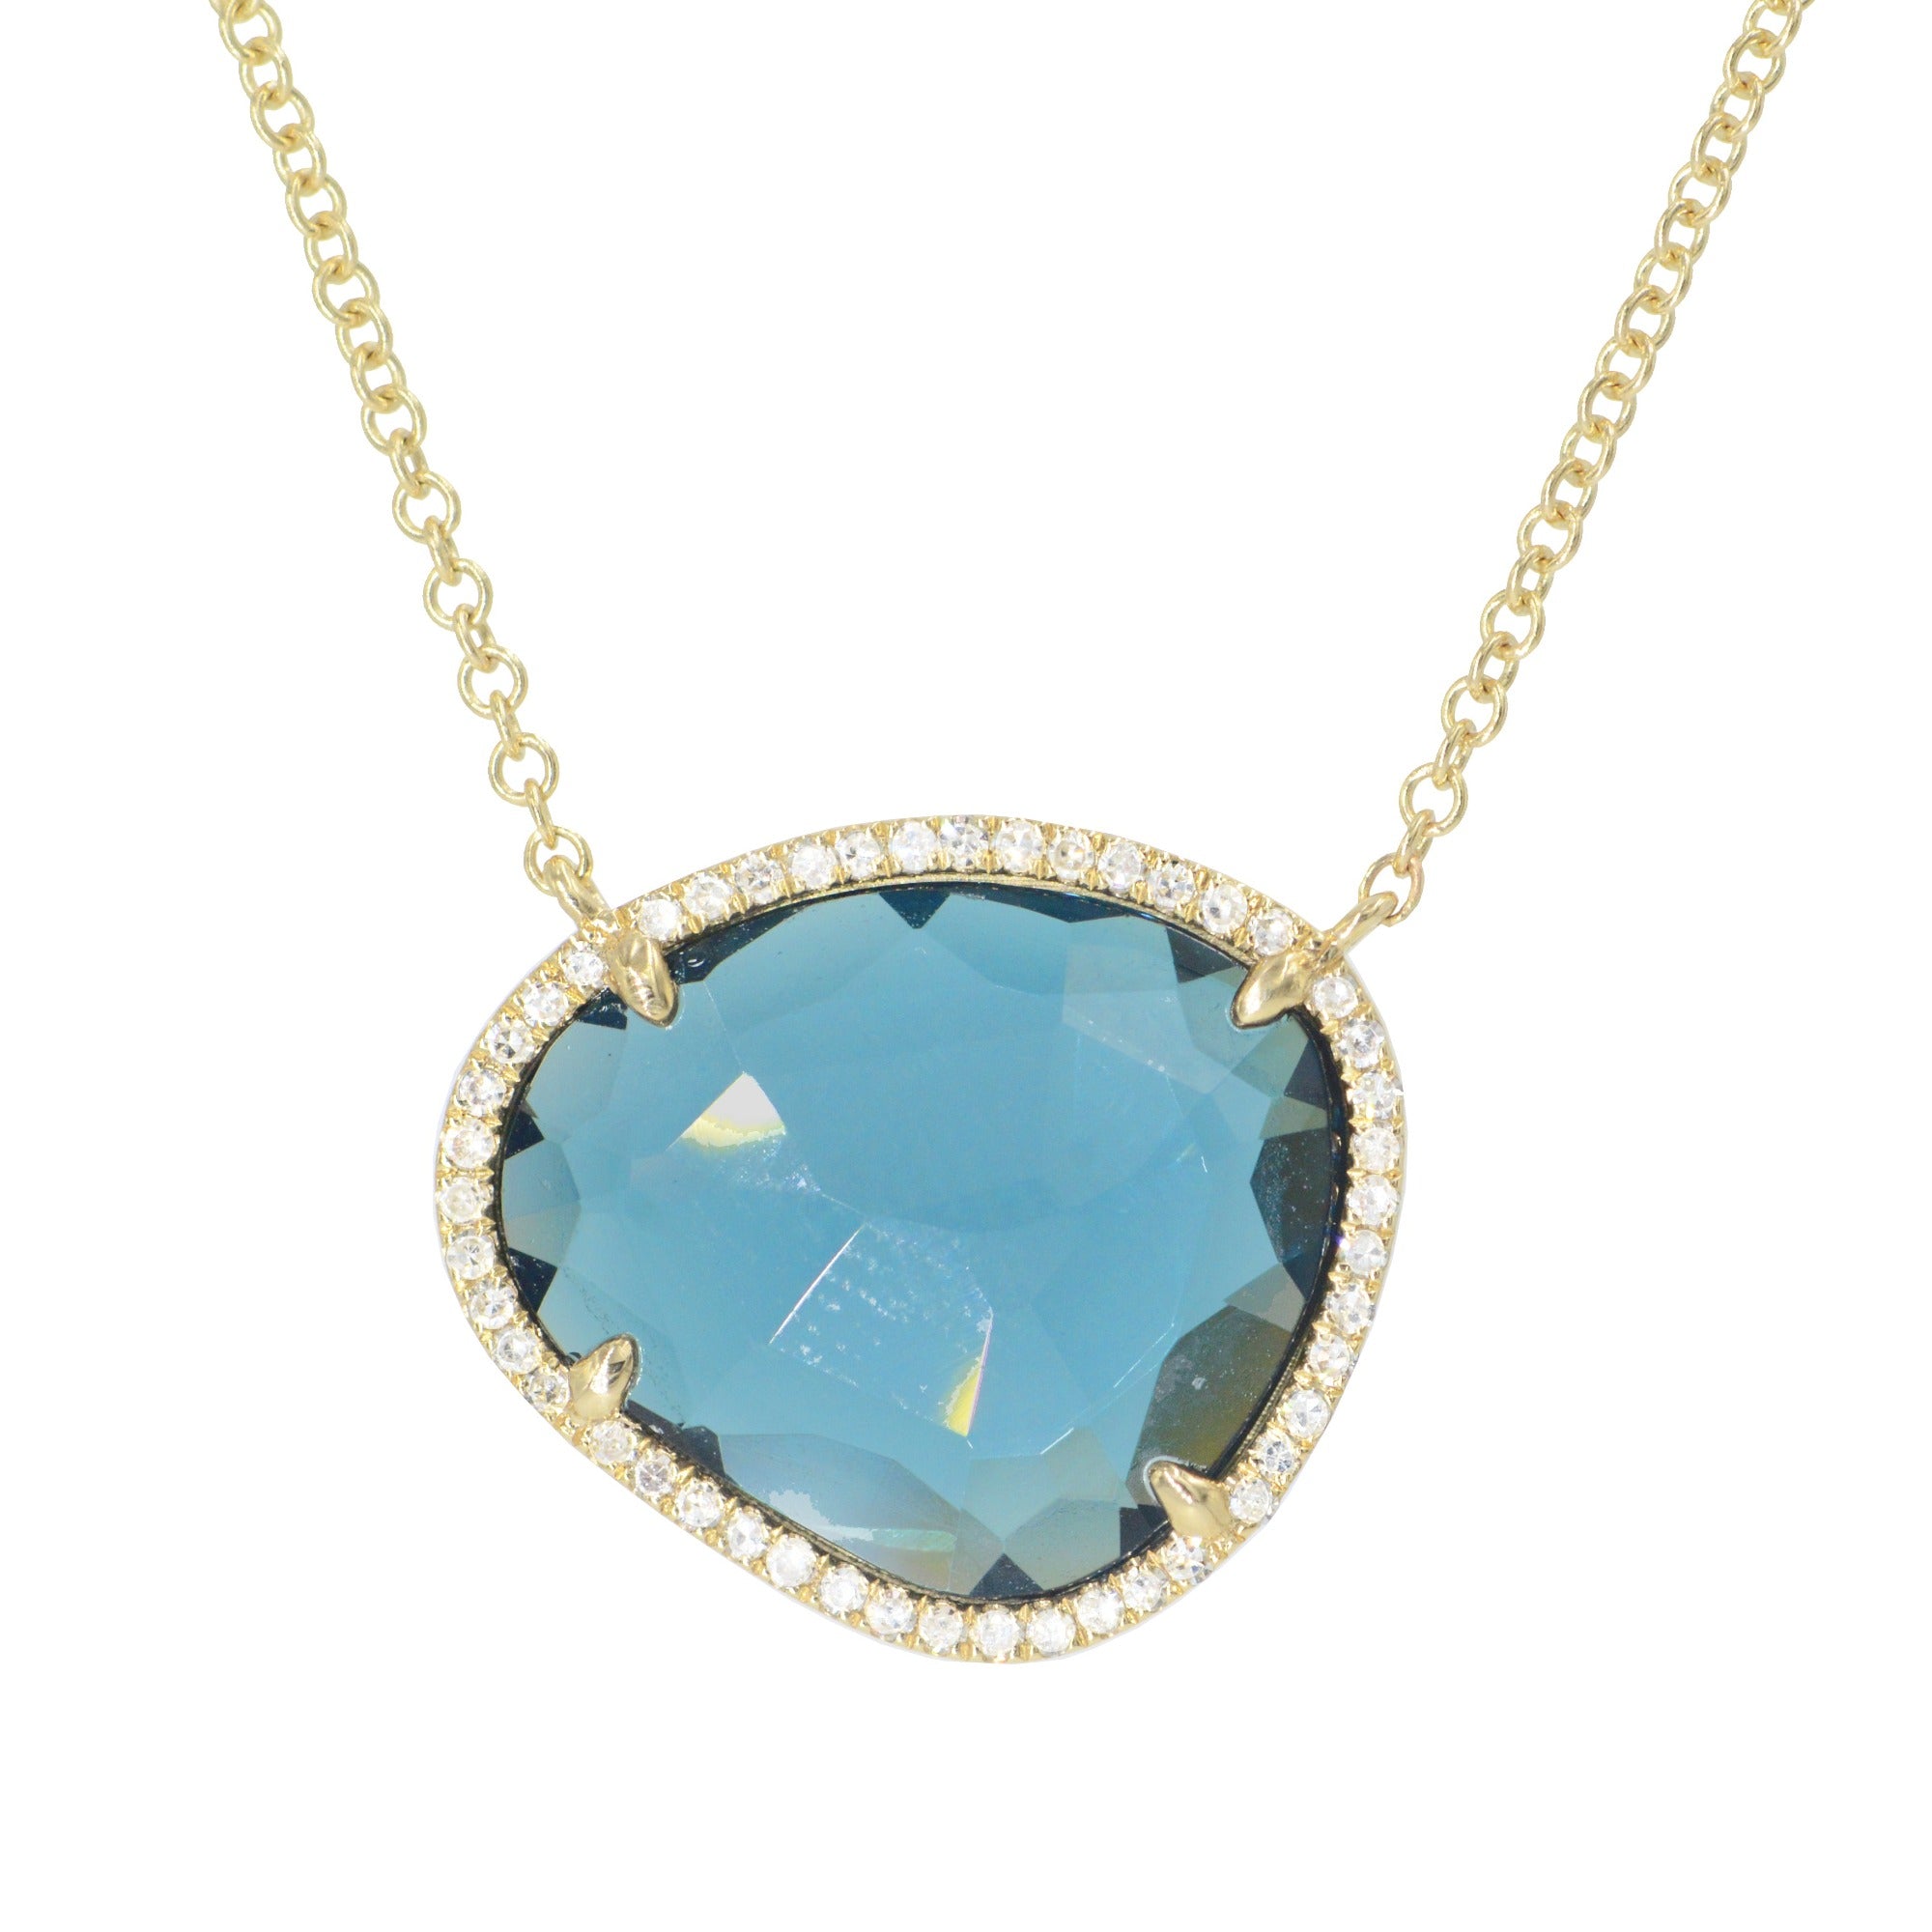 London Blue Topaz & White Lab-Created Sapphire Necklace Sterling Silver 18